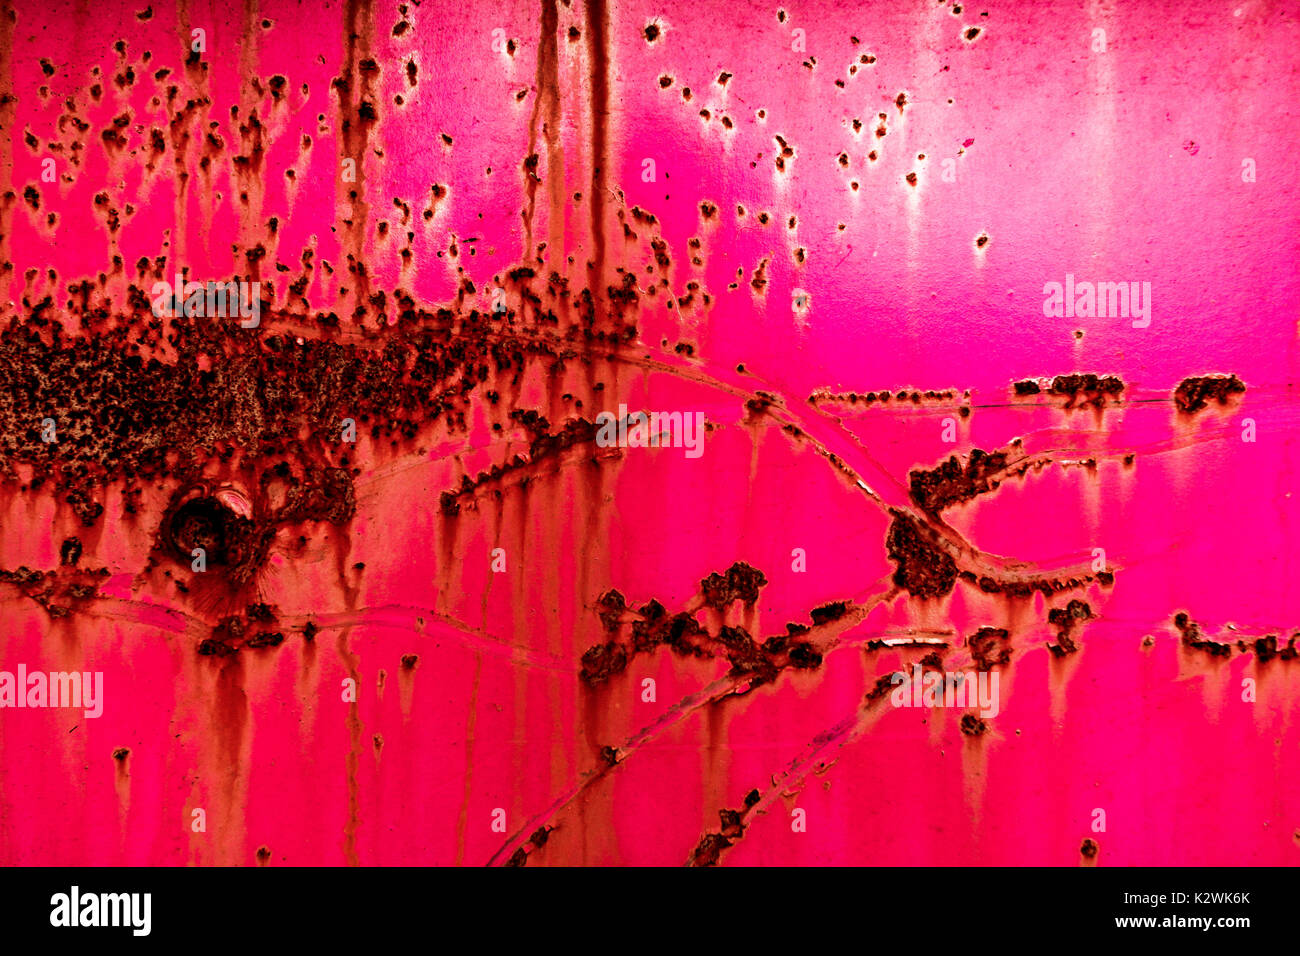 Abstract of rusted metal painted hot pink Stock Photo